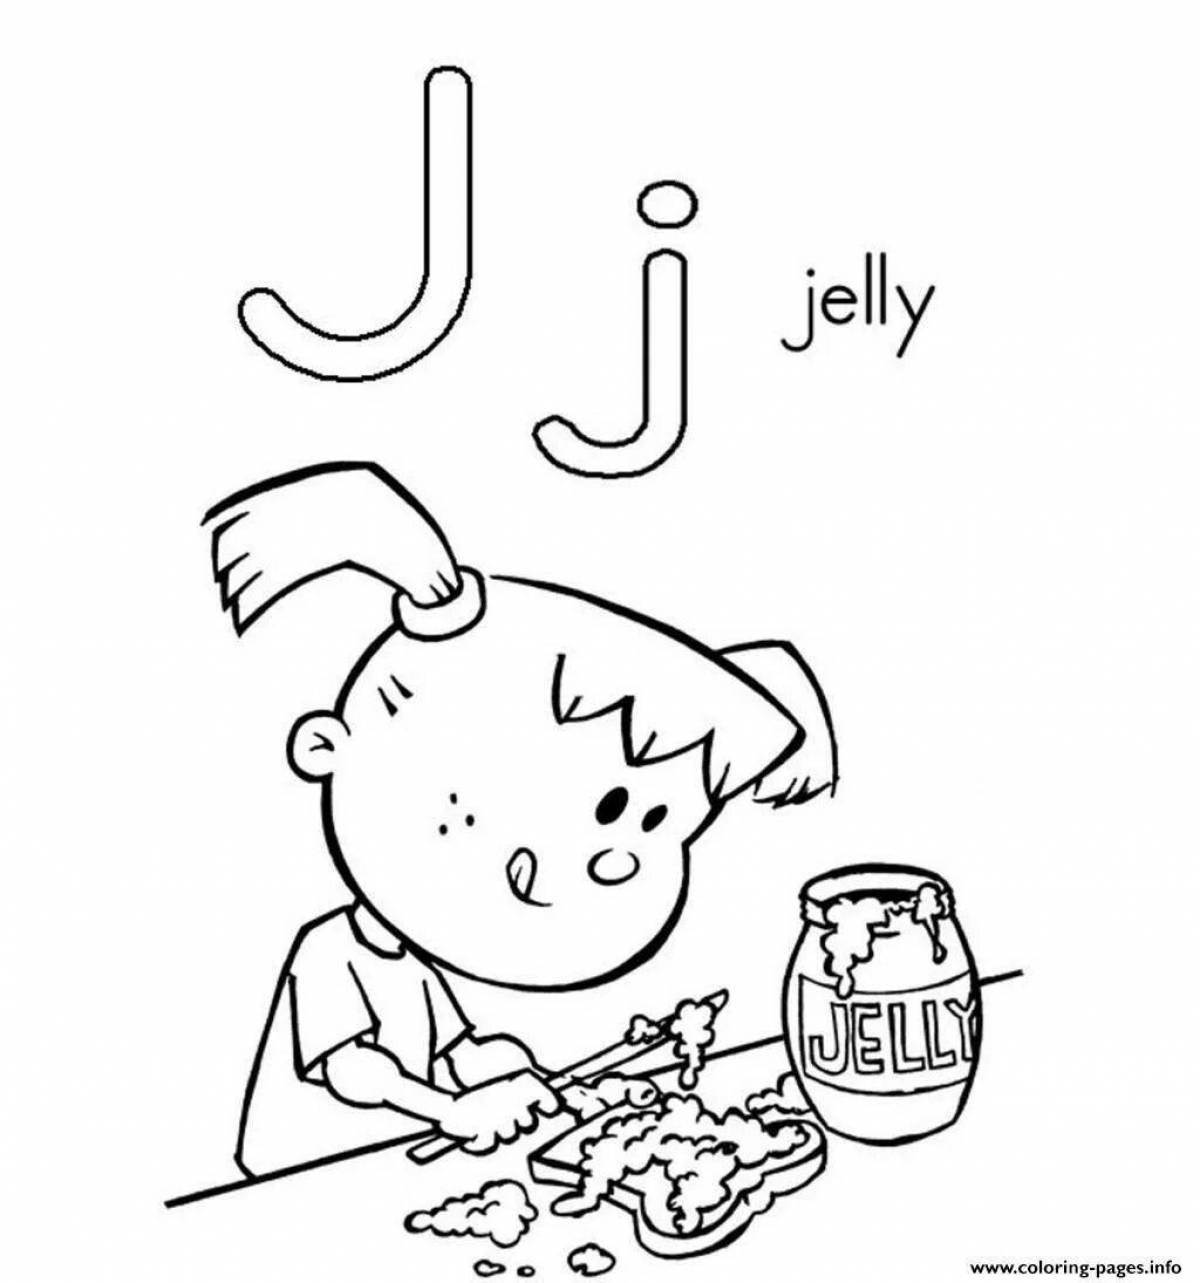 Creative letter j coloring book